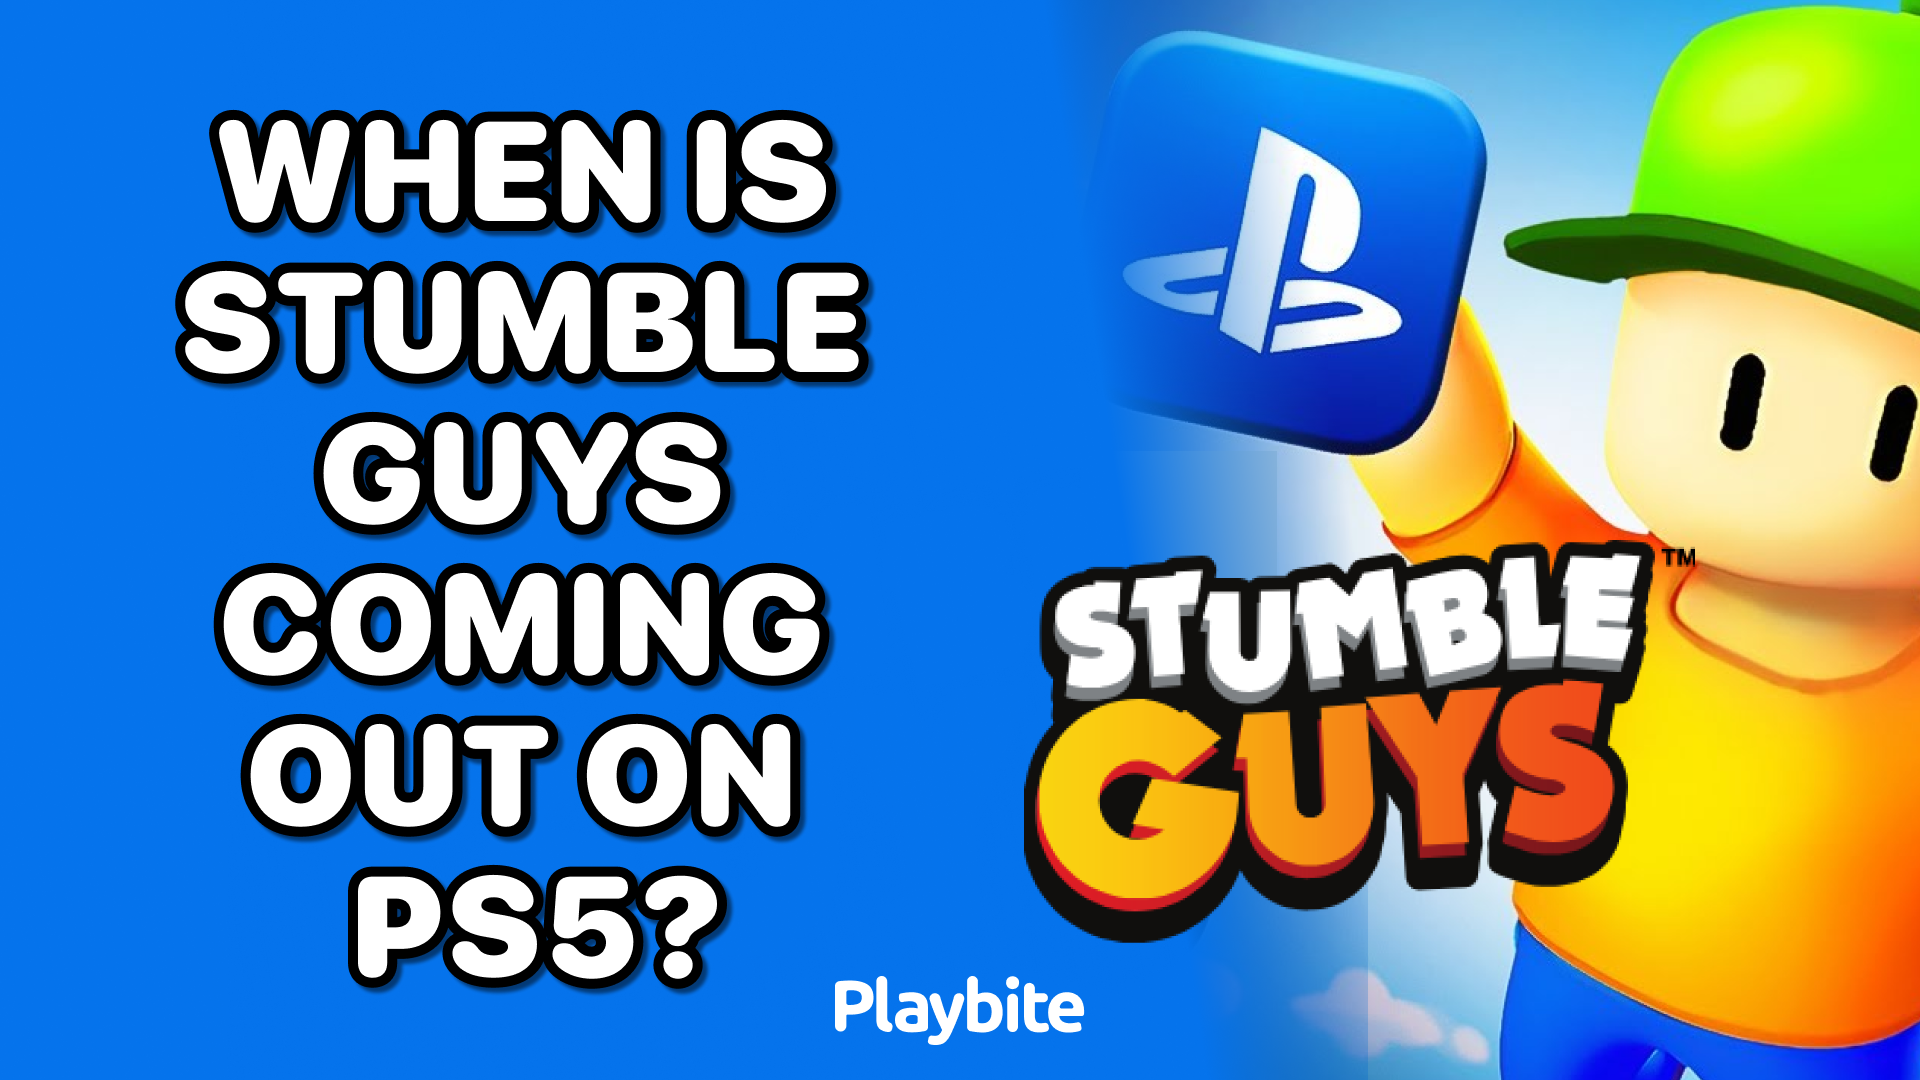 When Is Stumble Guys Coming Out on PS5?